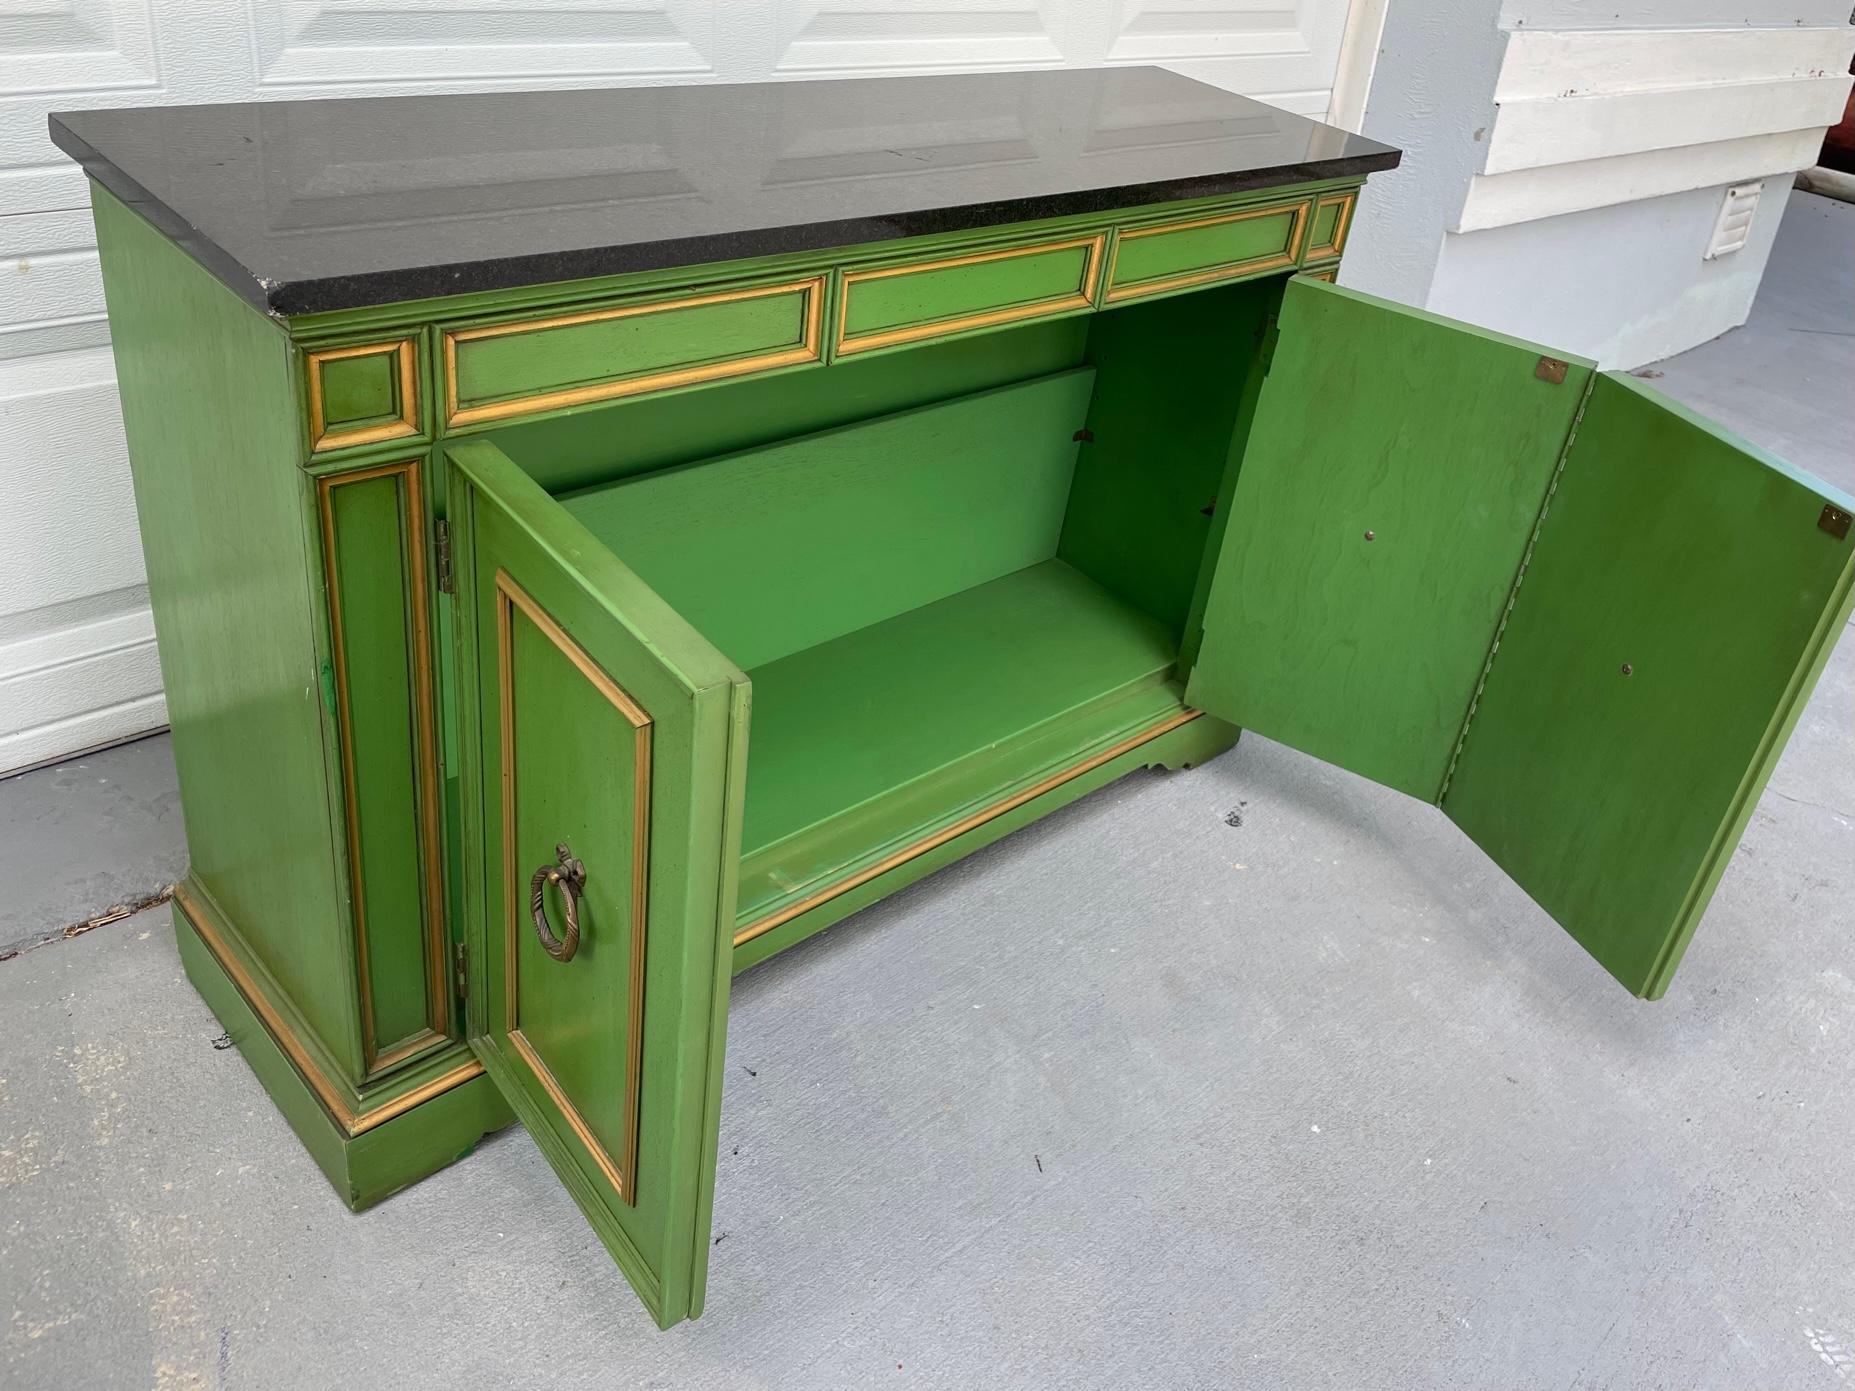 Late 20th Century Vintage Hollywood Regency Marble Top Emerald Green Credenza with Gold Accents